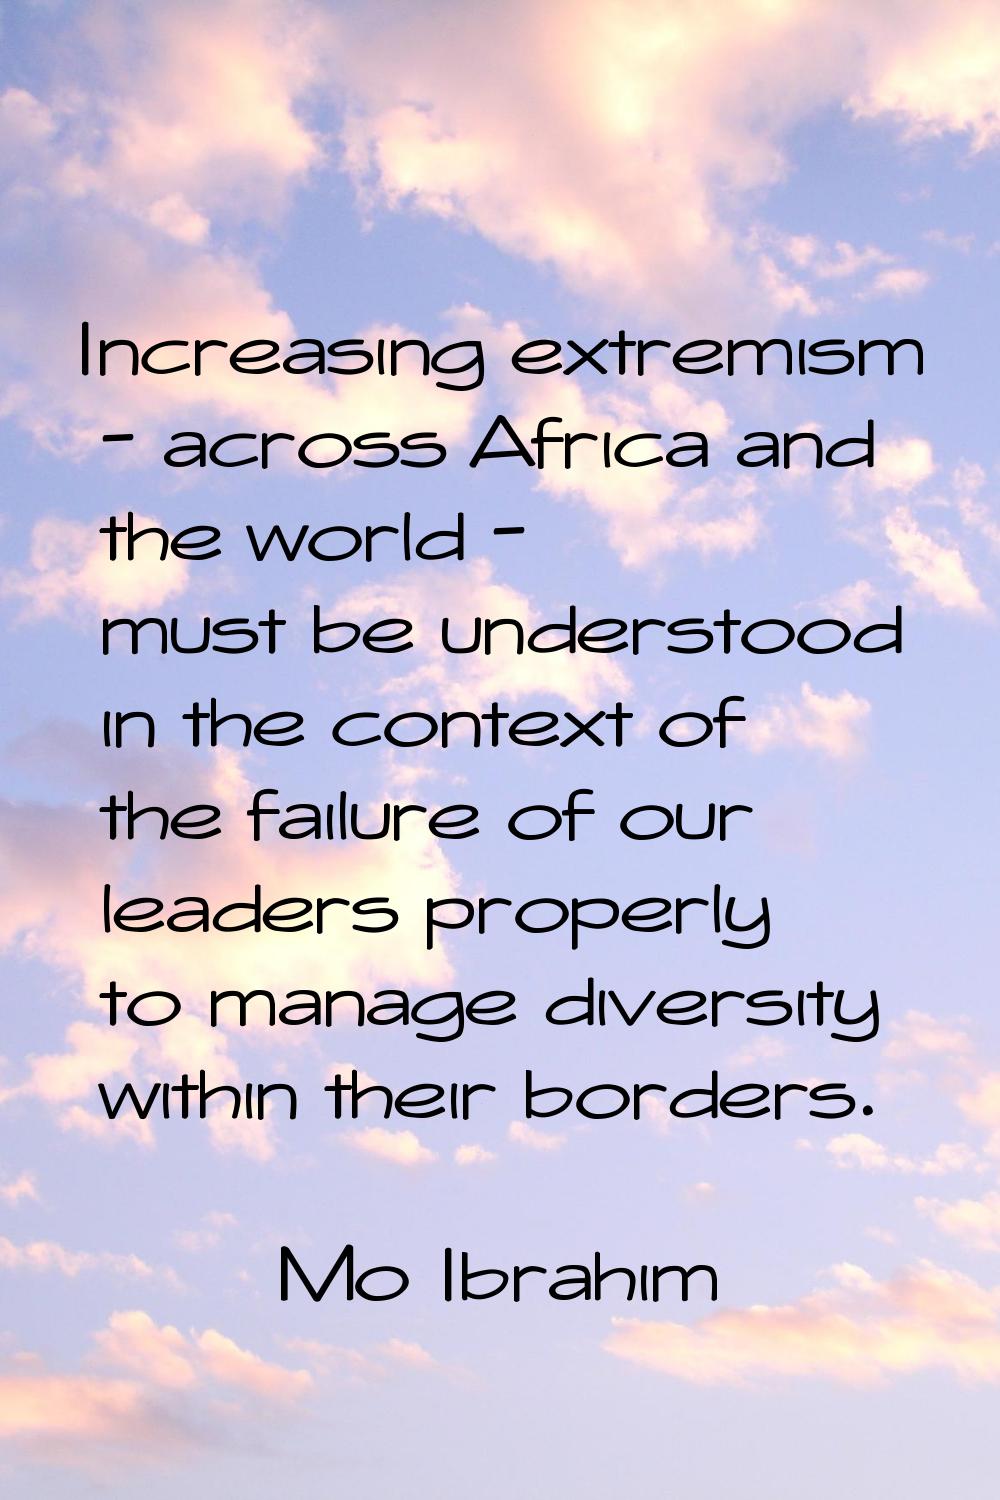 Increasing extremism - across Africa and the world - must be understood in the context of the failu